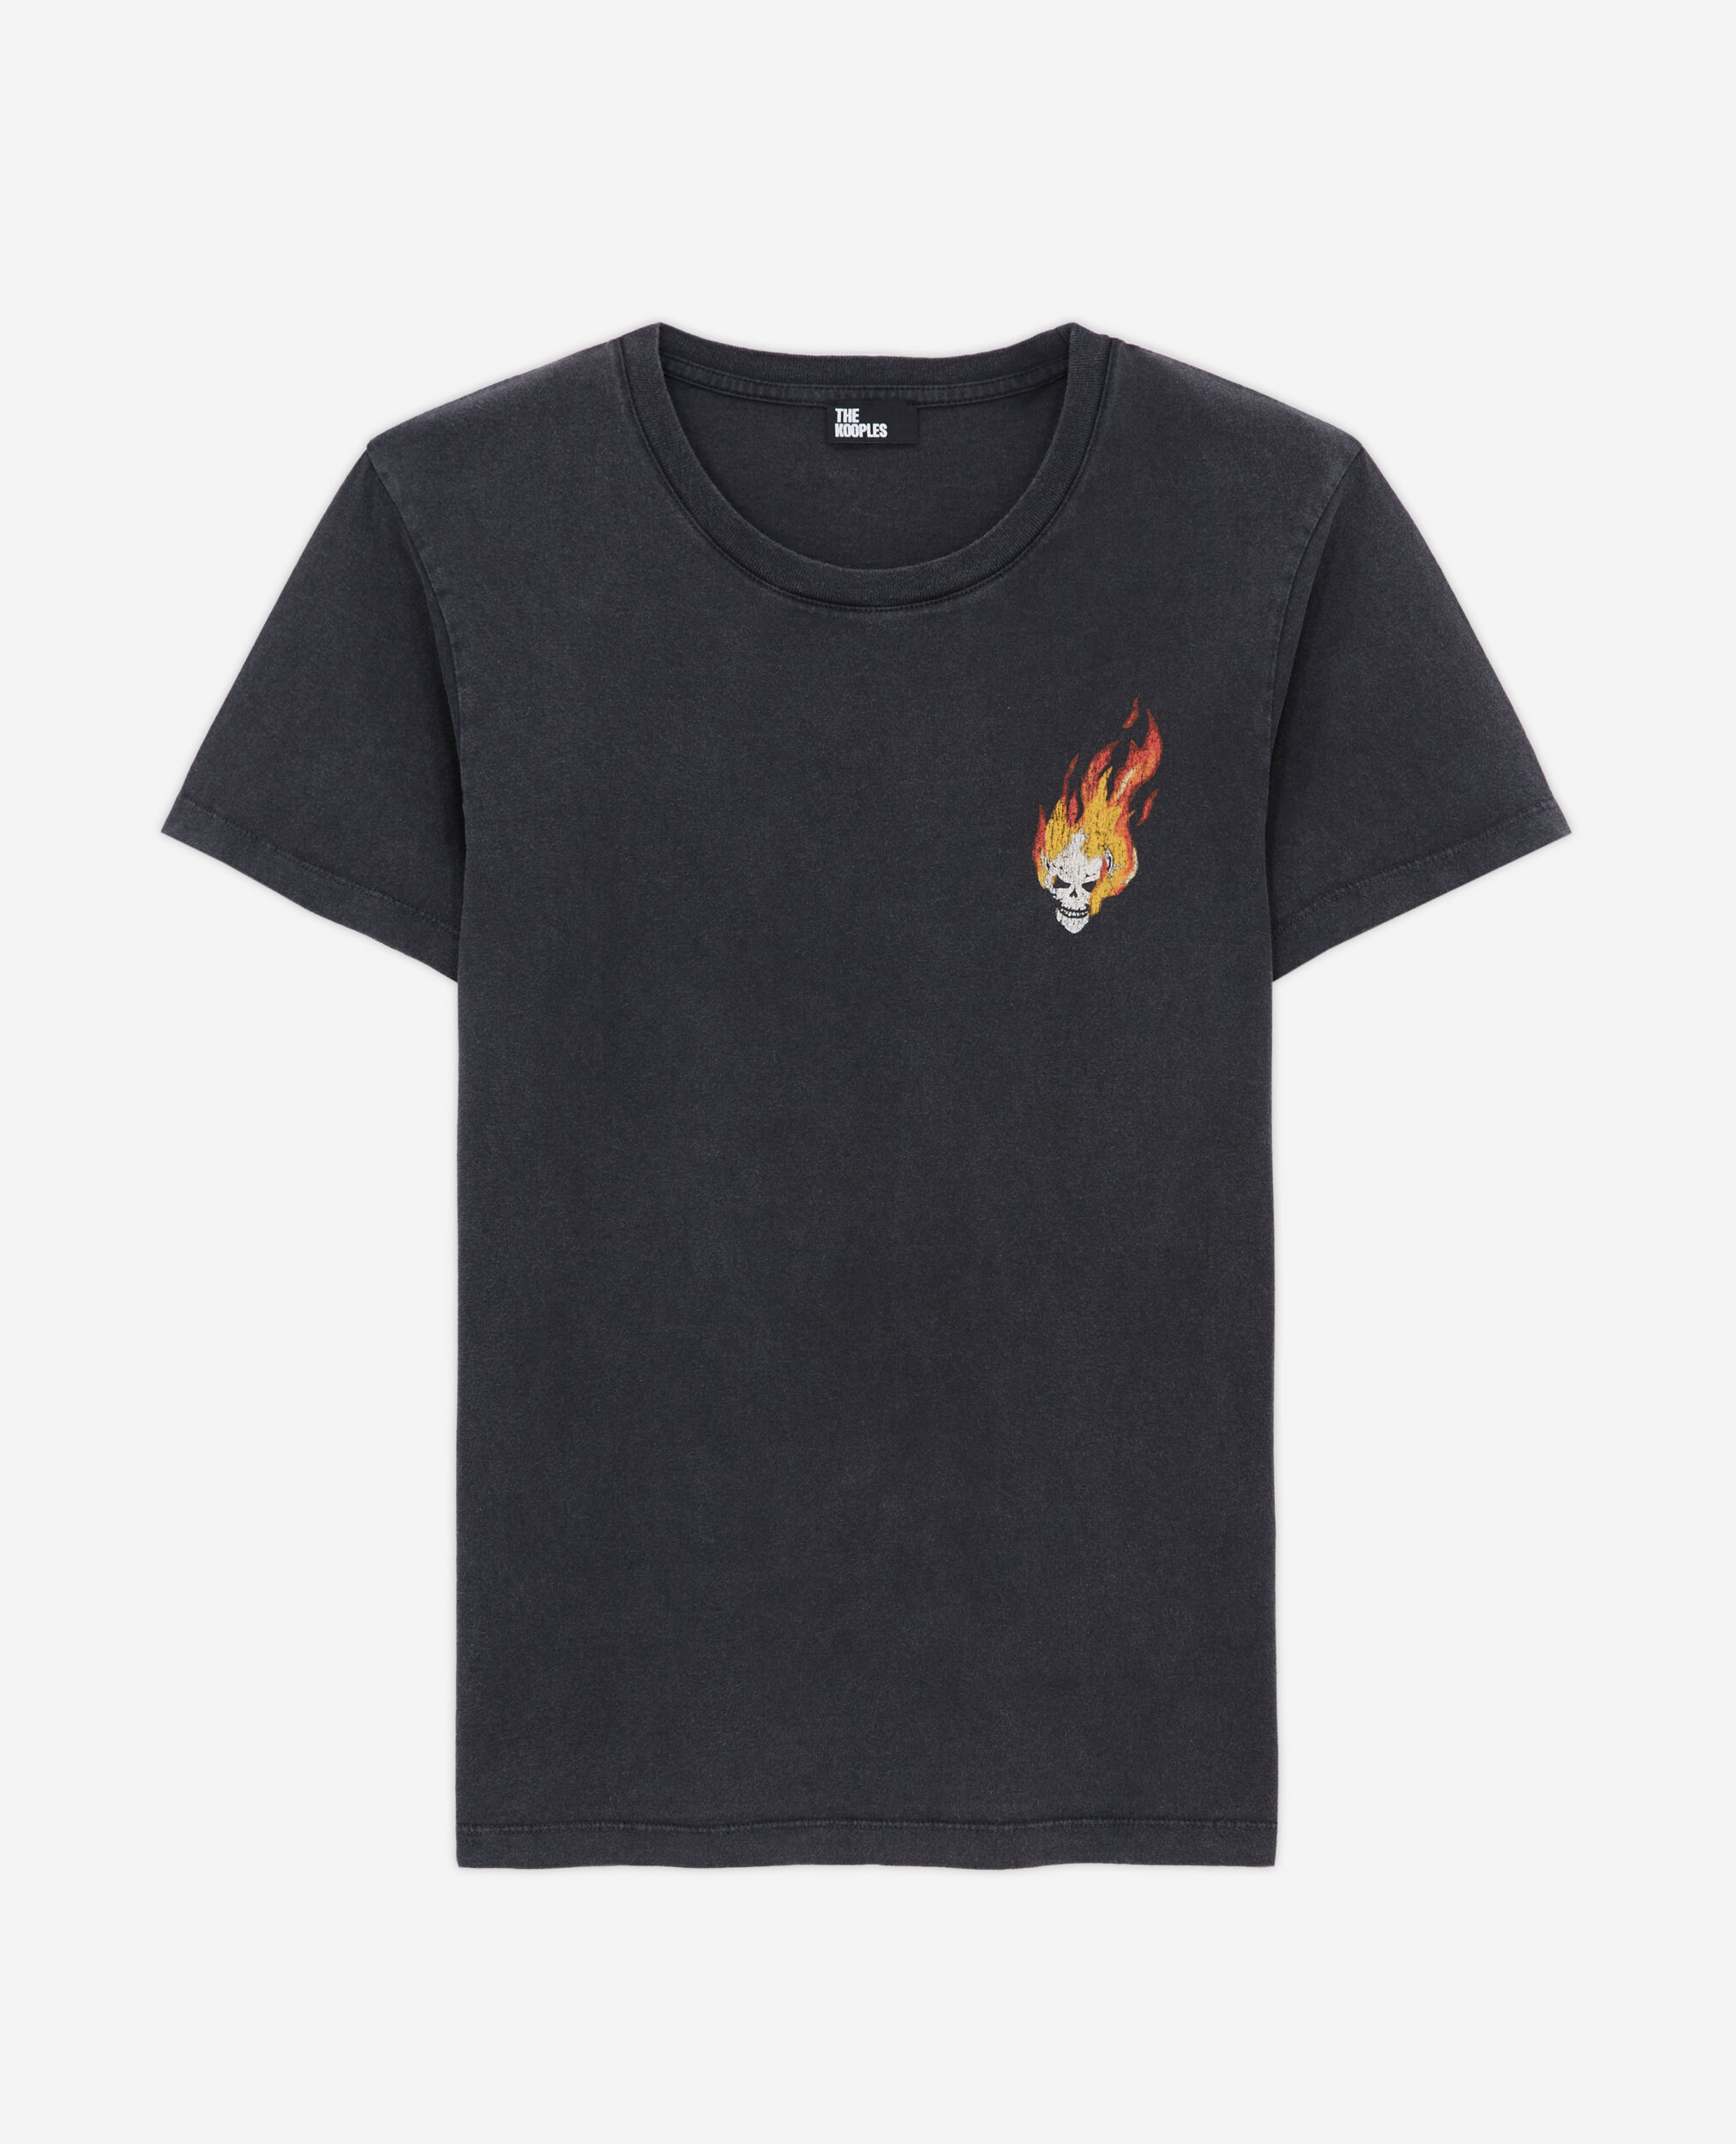 Black T-shirt with Skull on fire print, BLACK WASHED, hi-res image number null